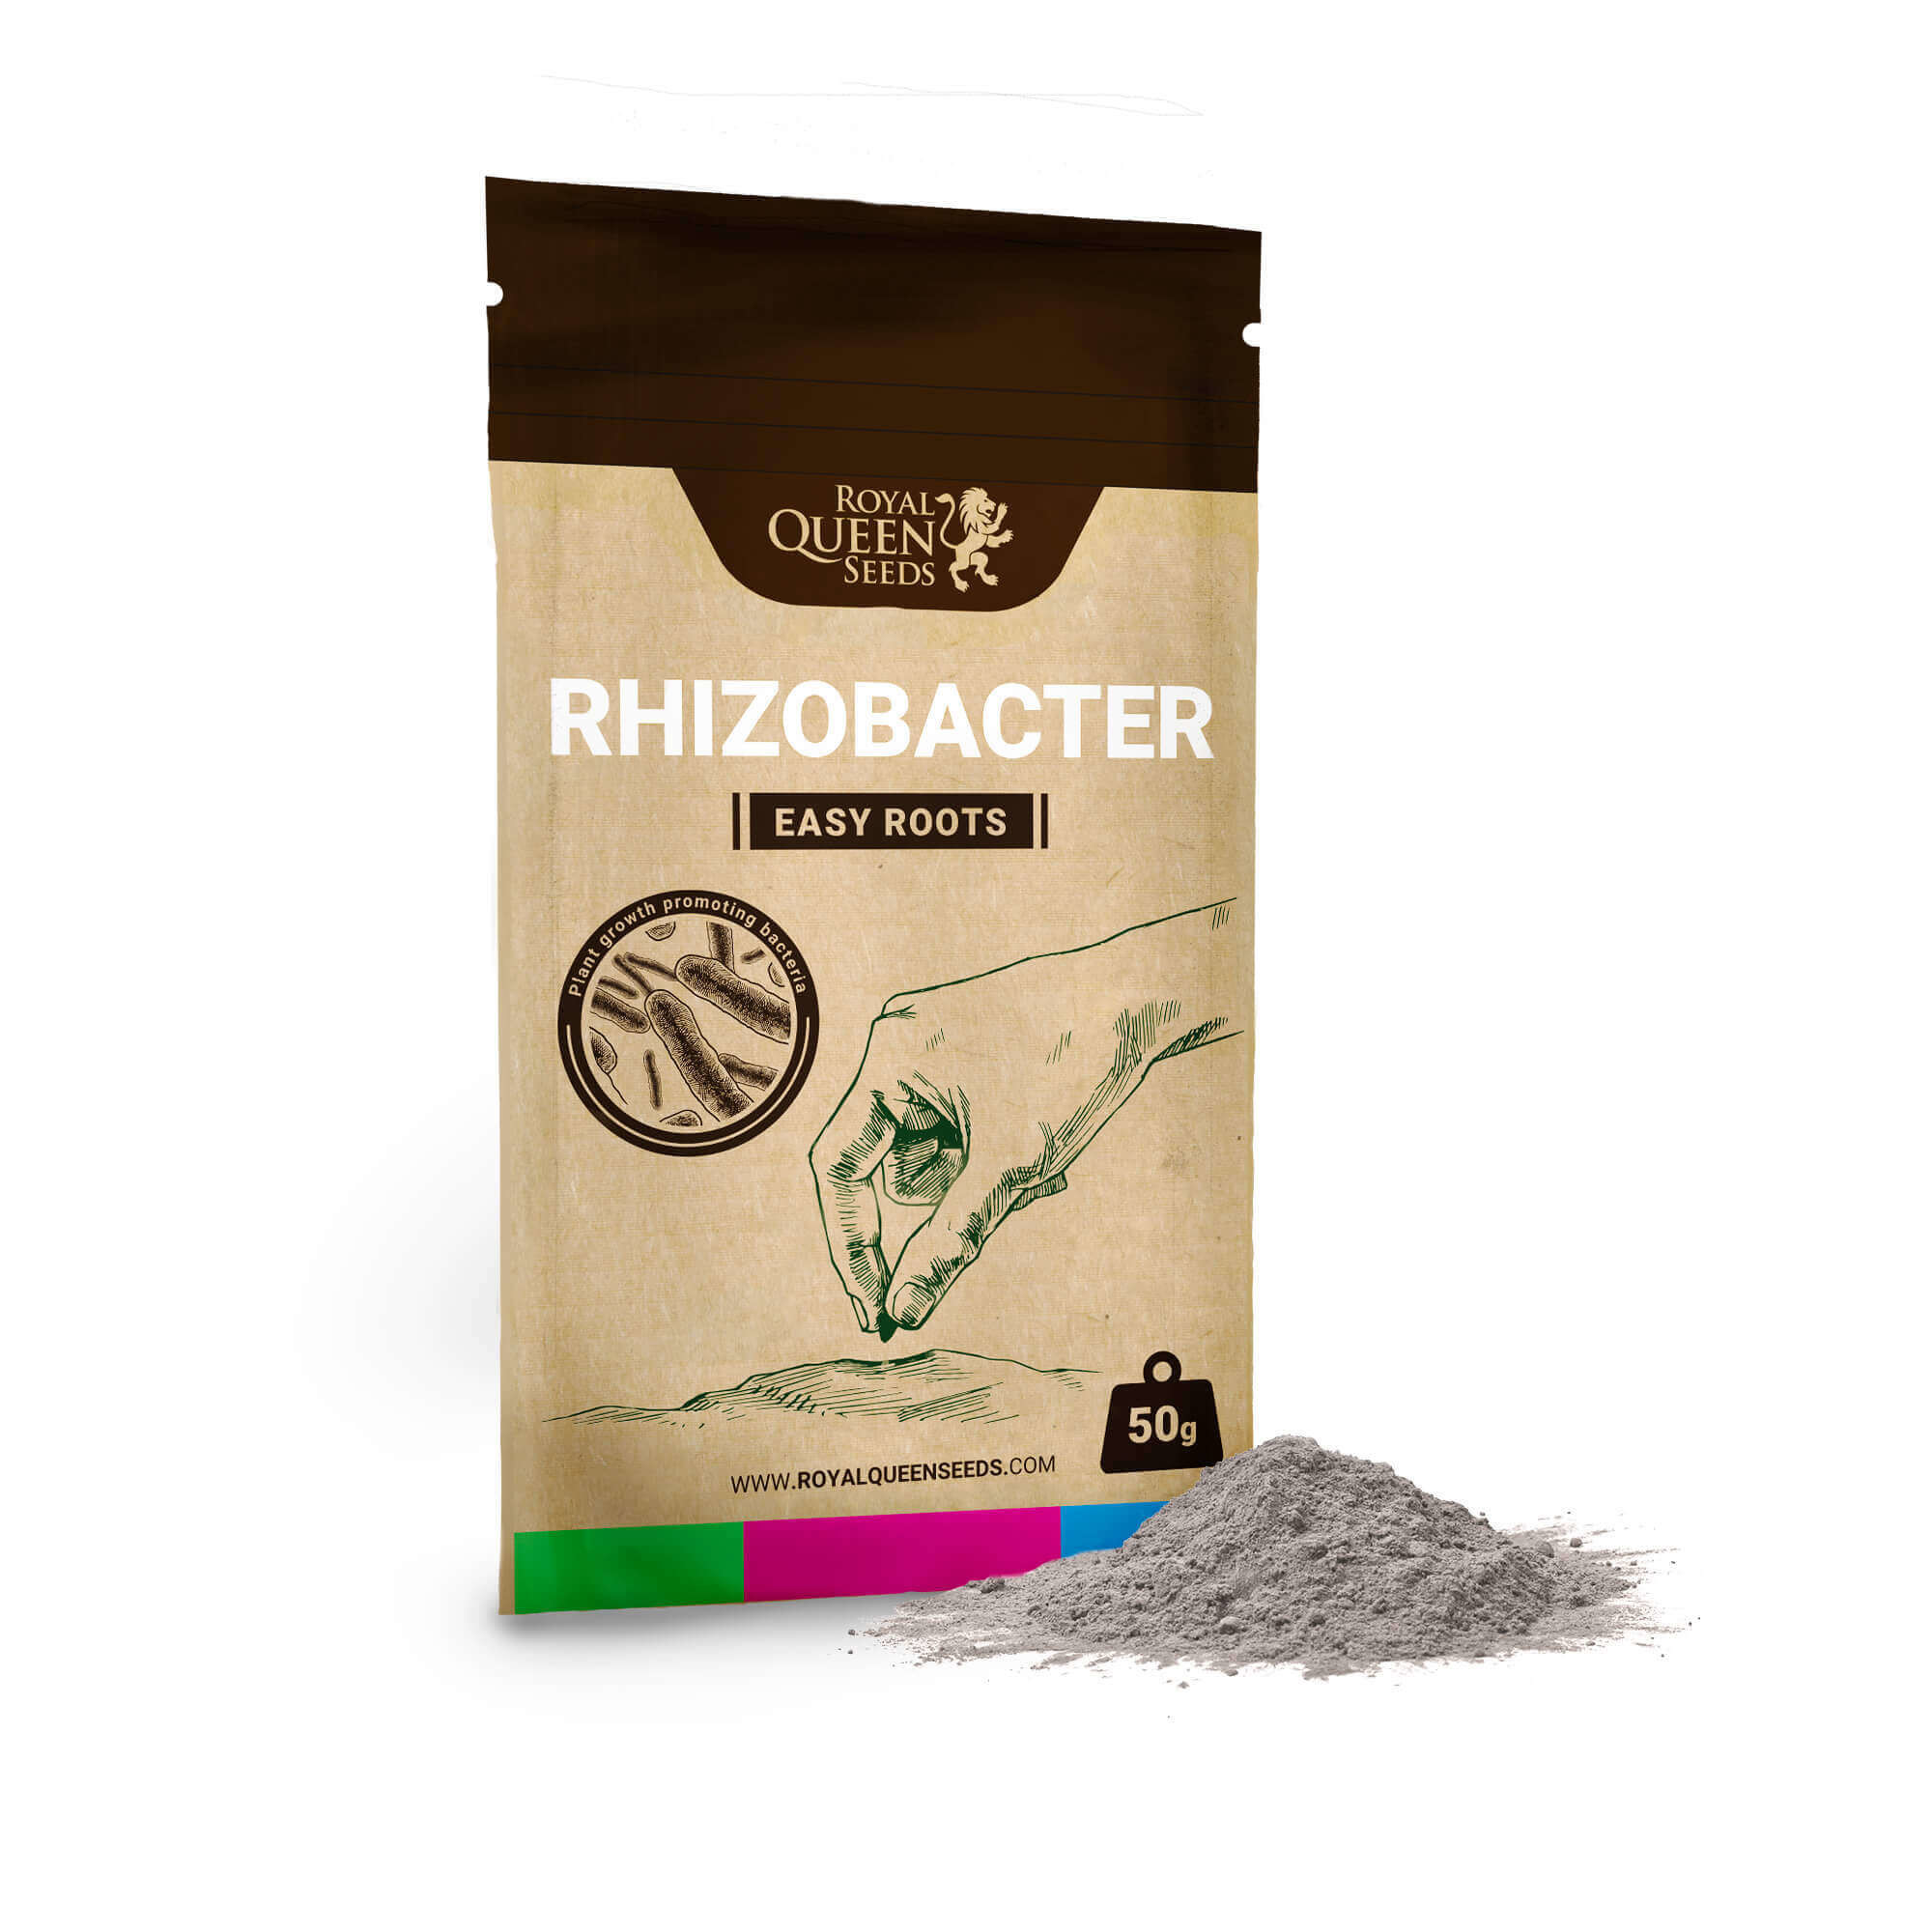 Rhizobacter Roots Seeds Easy Royal Queen -